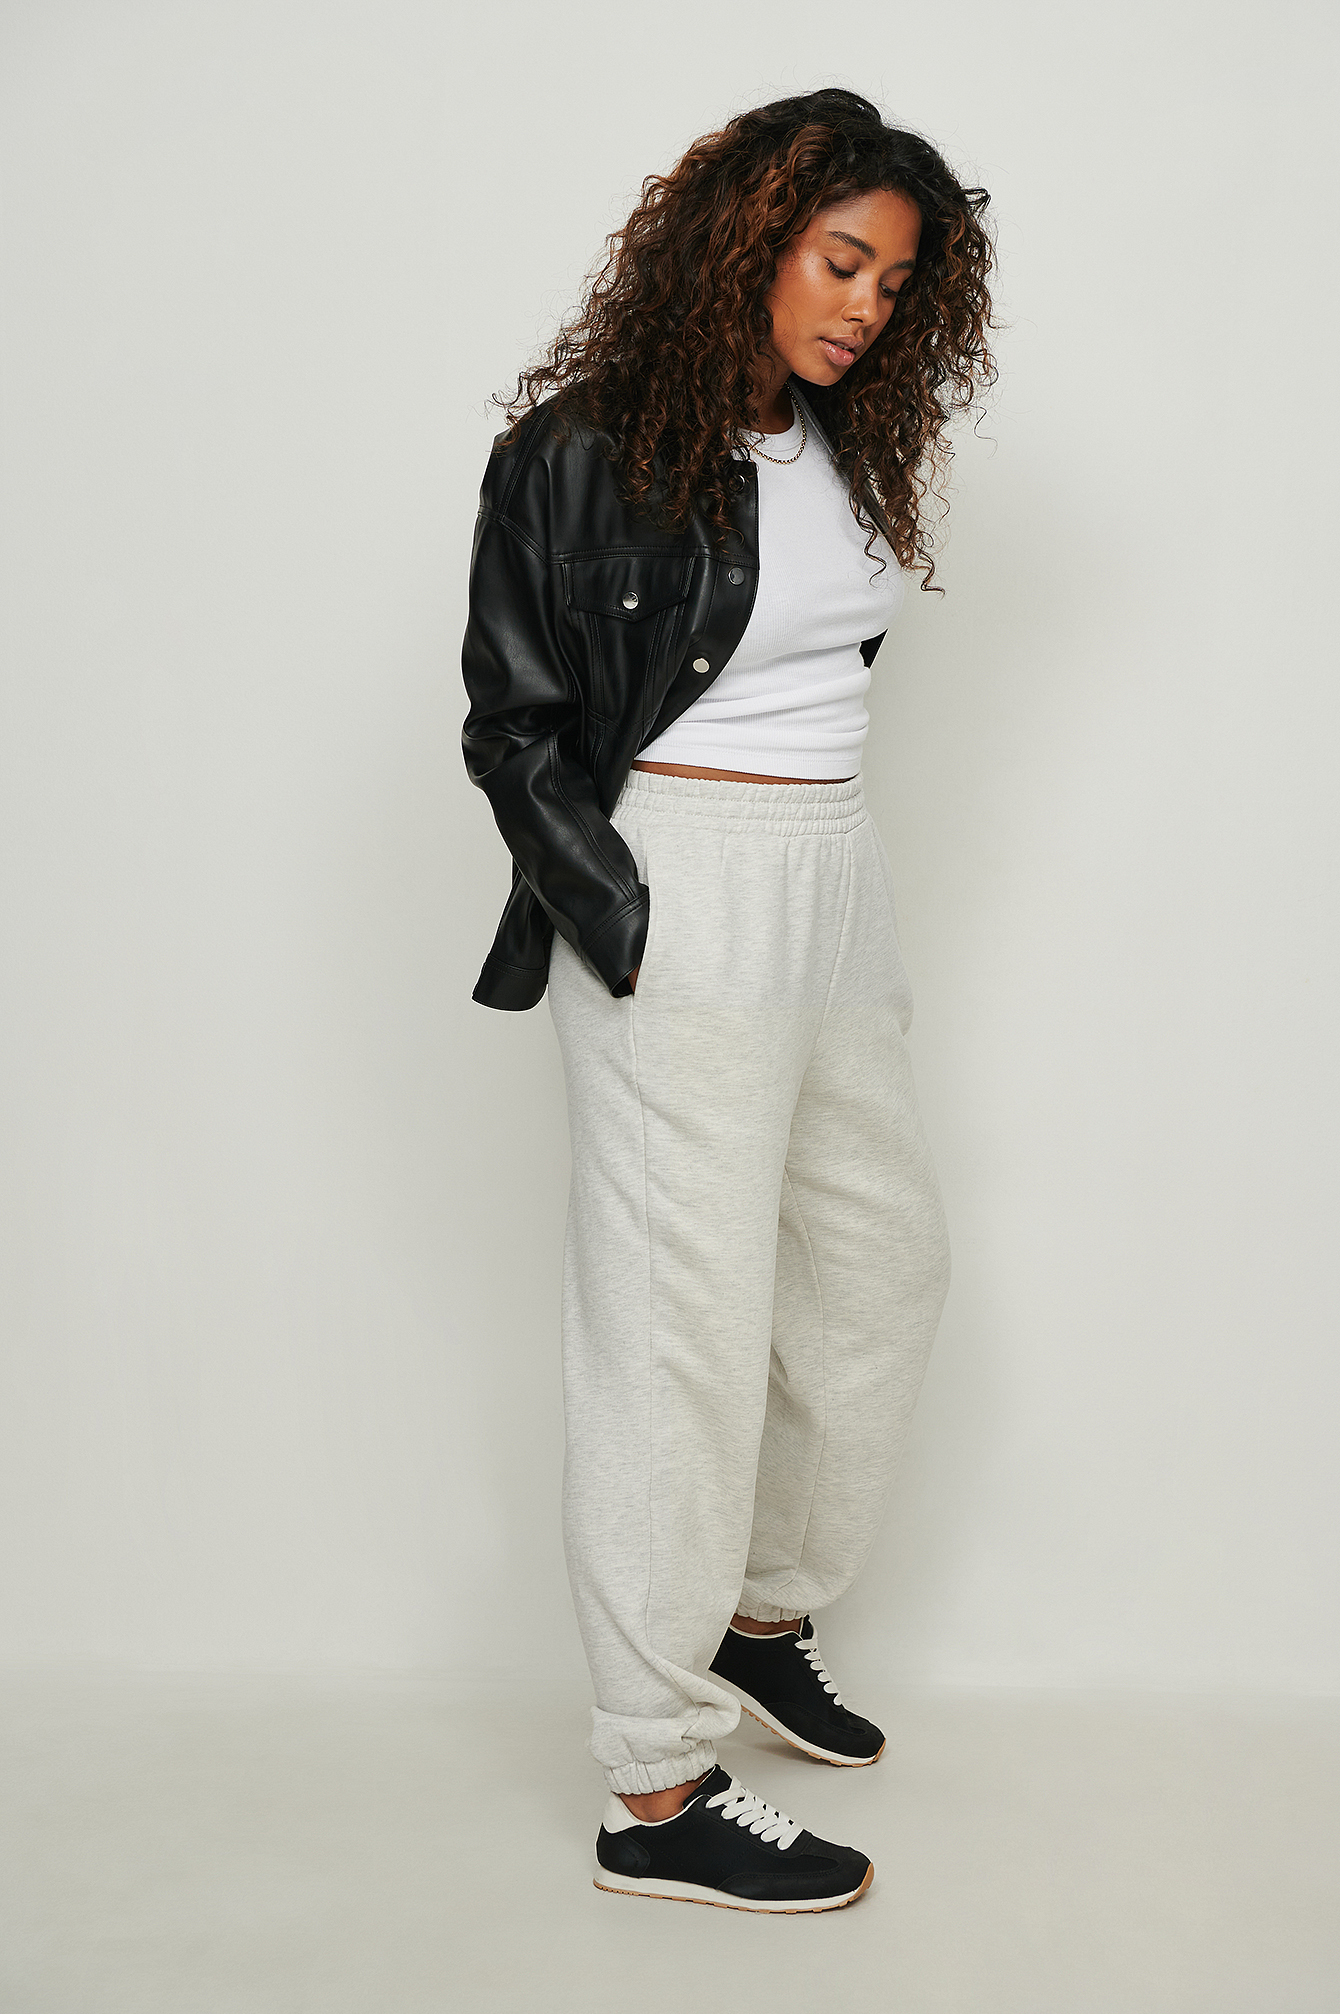 Oversized Sweatpants Outfit